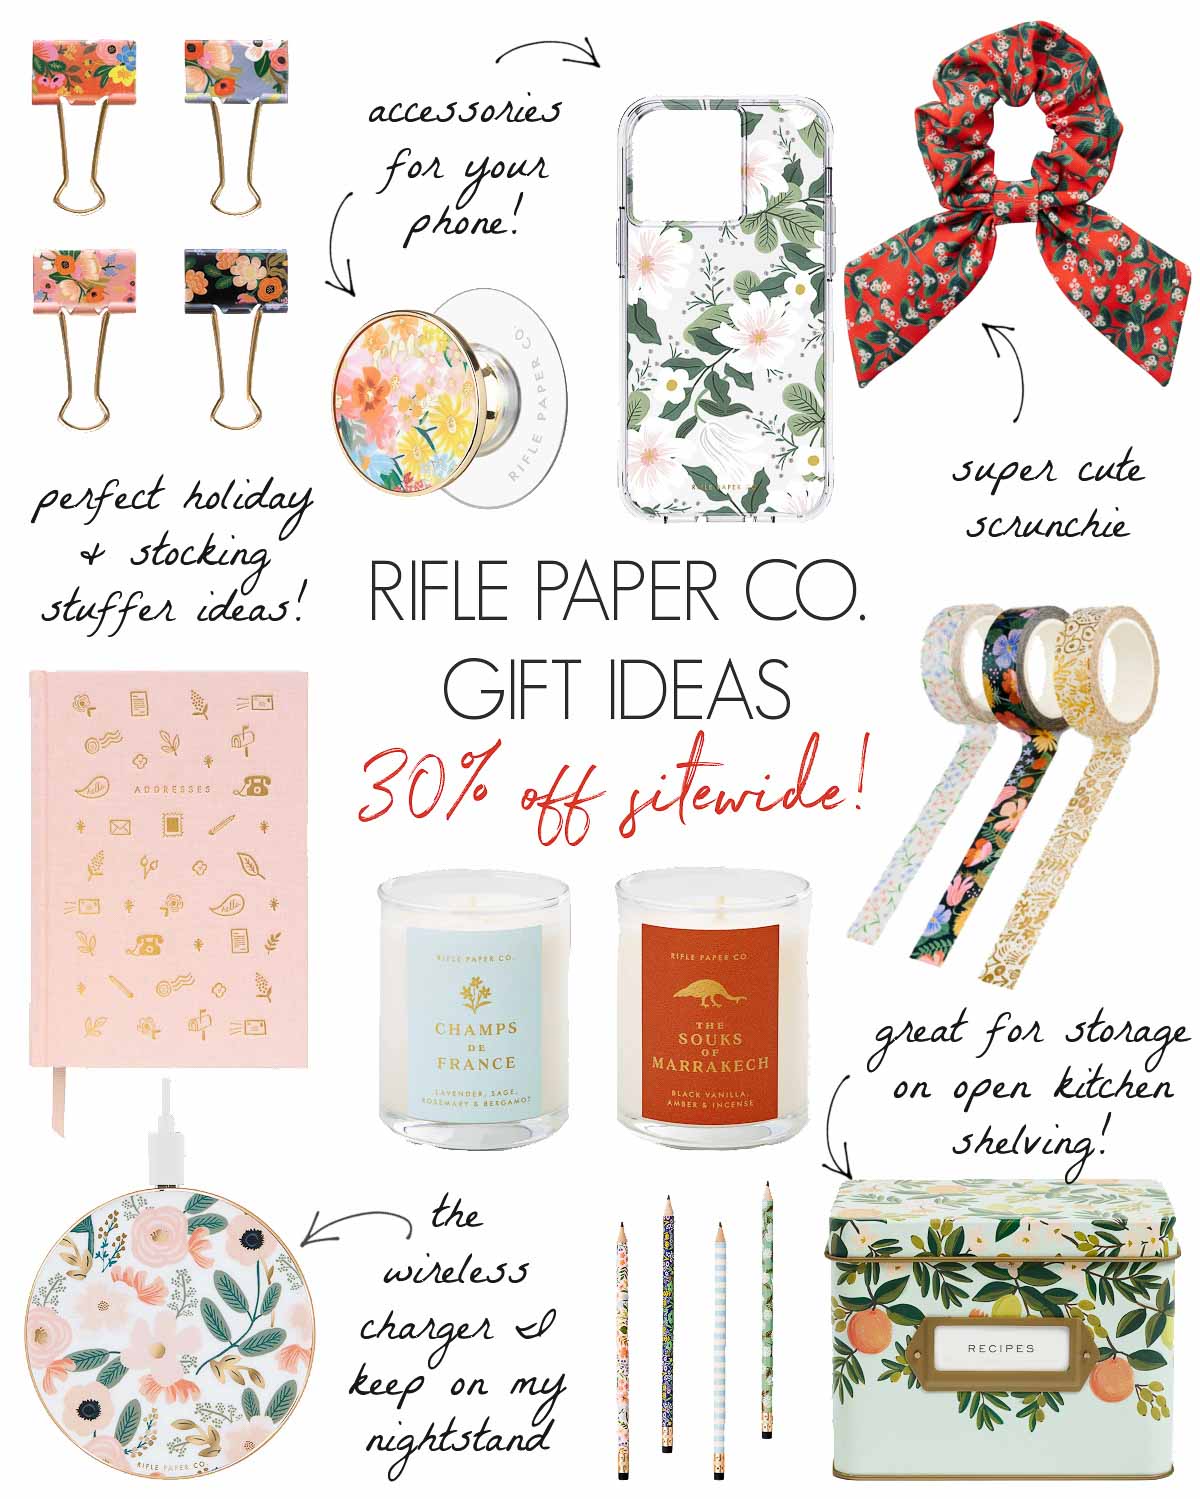 Black Friday & Cyber Monday Rifle Paper Co. Deals!